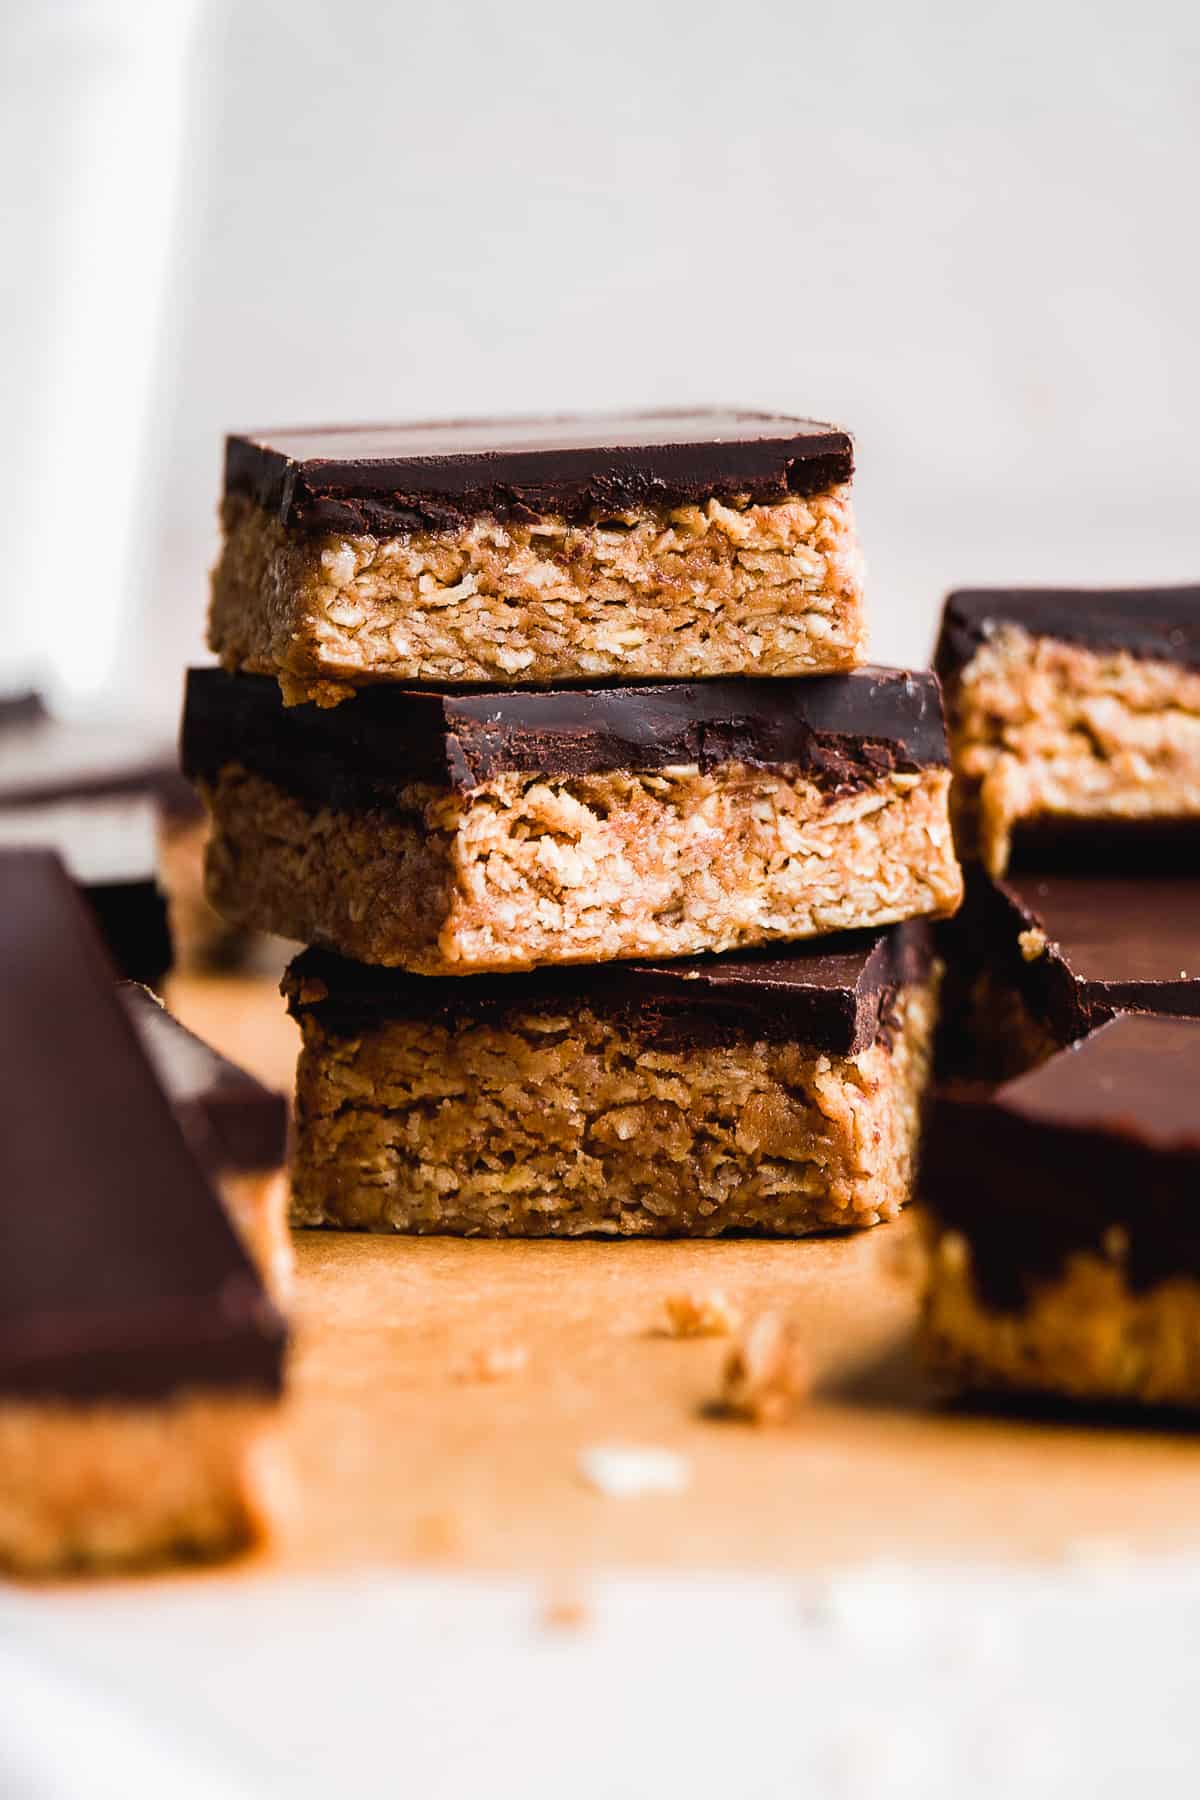 Stack of chocolate peanut butter oatmeal bars on parchment paper.